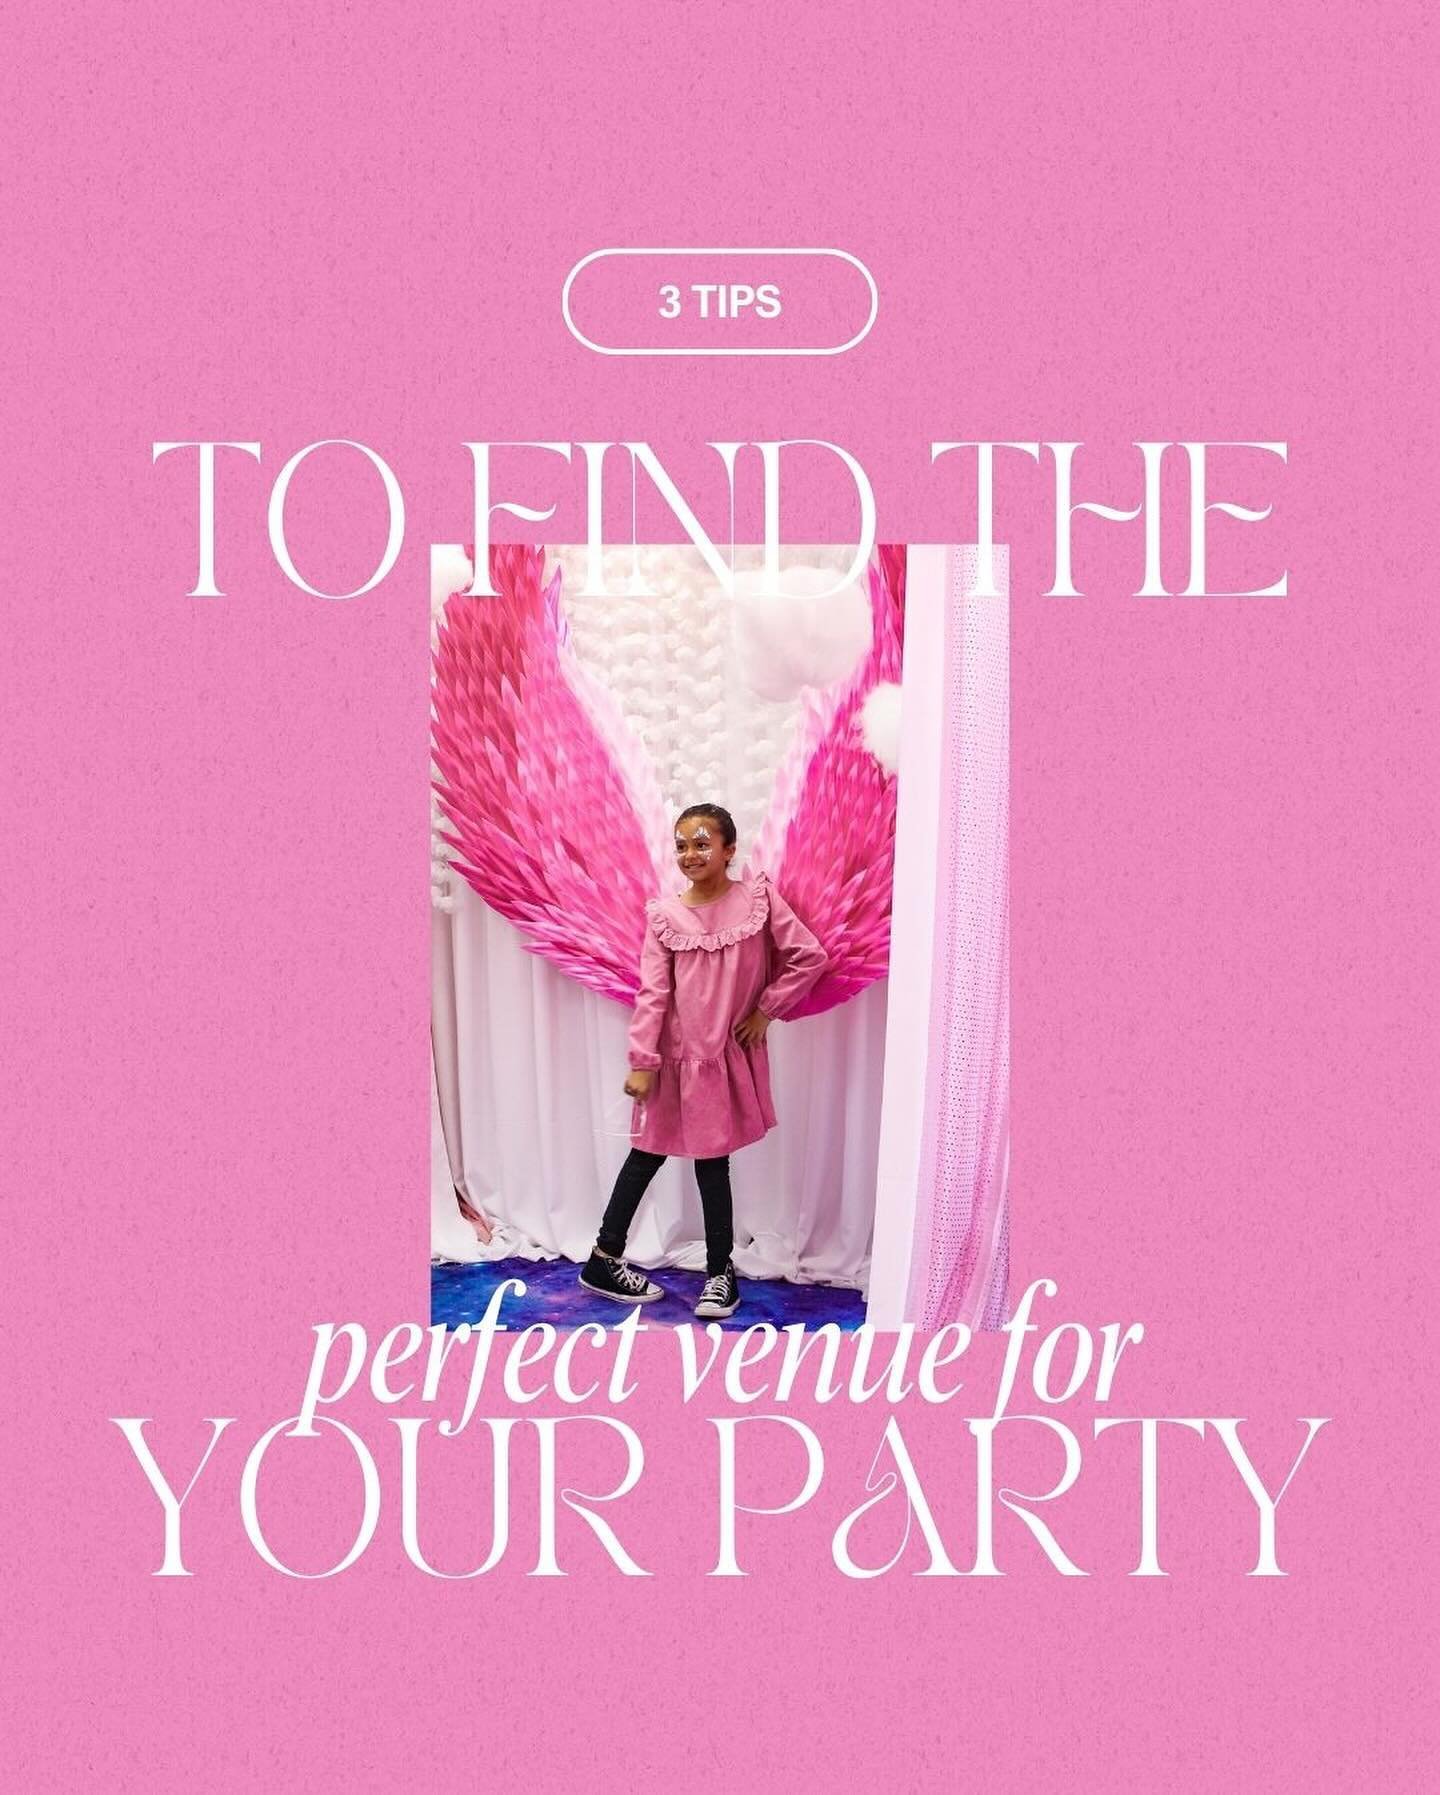 Ready to turn your party dreams into reality? 🌟 Inquire today and let&rsquo;s start crafting the perfect celebration together! 💗🎉 

posepartypost.com
💌hello@posepartypost.com
📞(725)-258-9399

#lasvegaseventspace #lasvegaspartyvenue #lasvegaseven